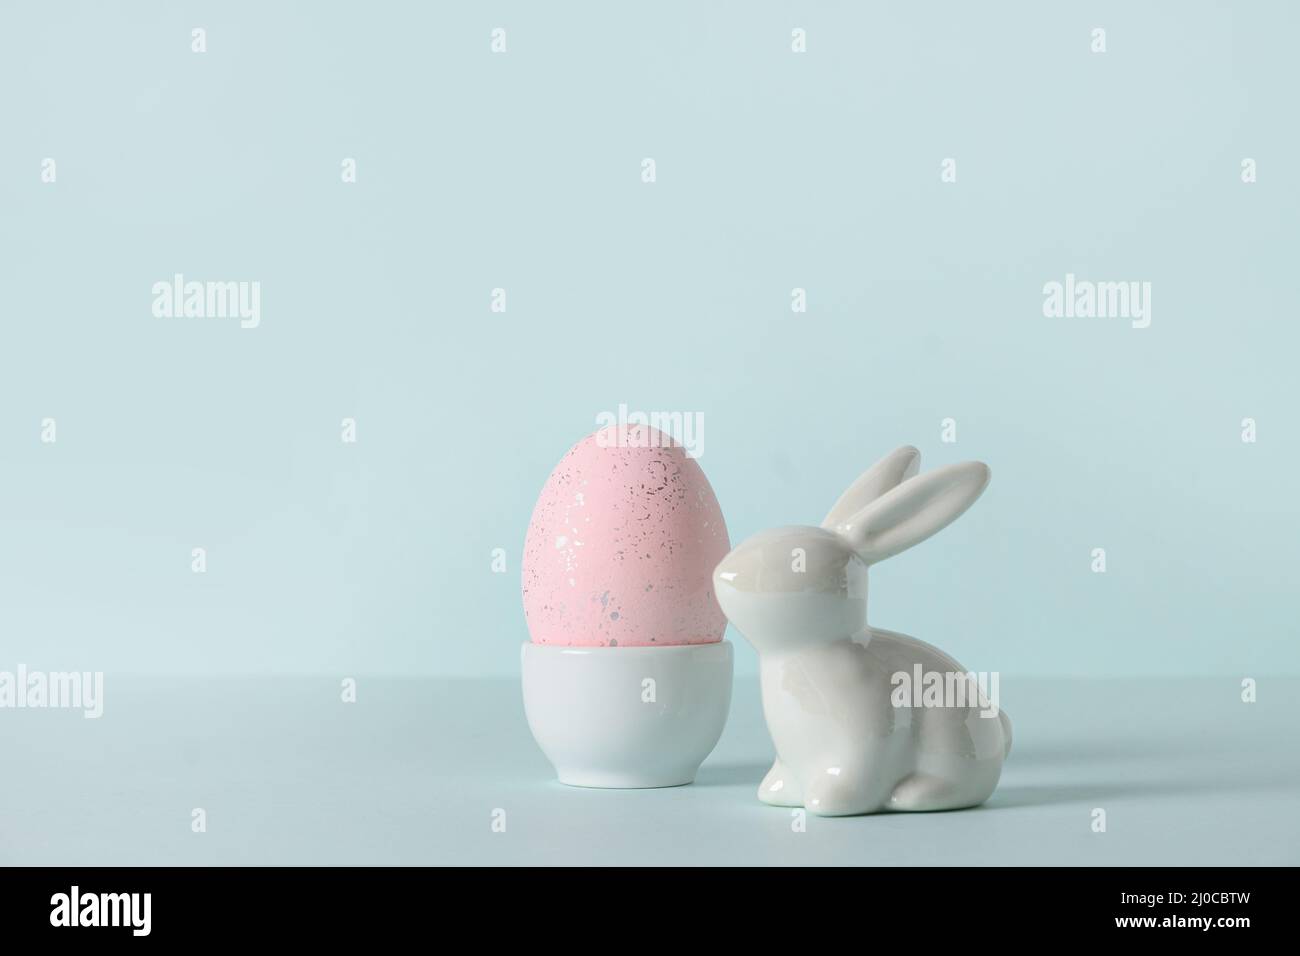 701091 Rabbit with Glasses 20cm Modern Easter Figurine From White-Glazed Earthenware 